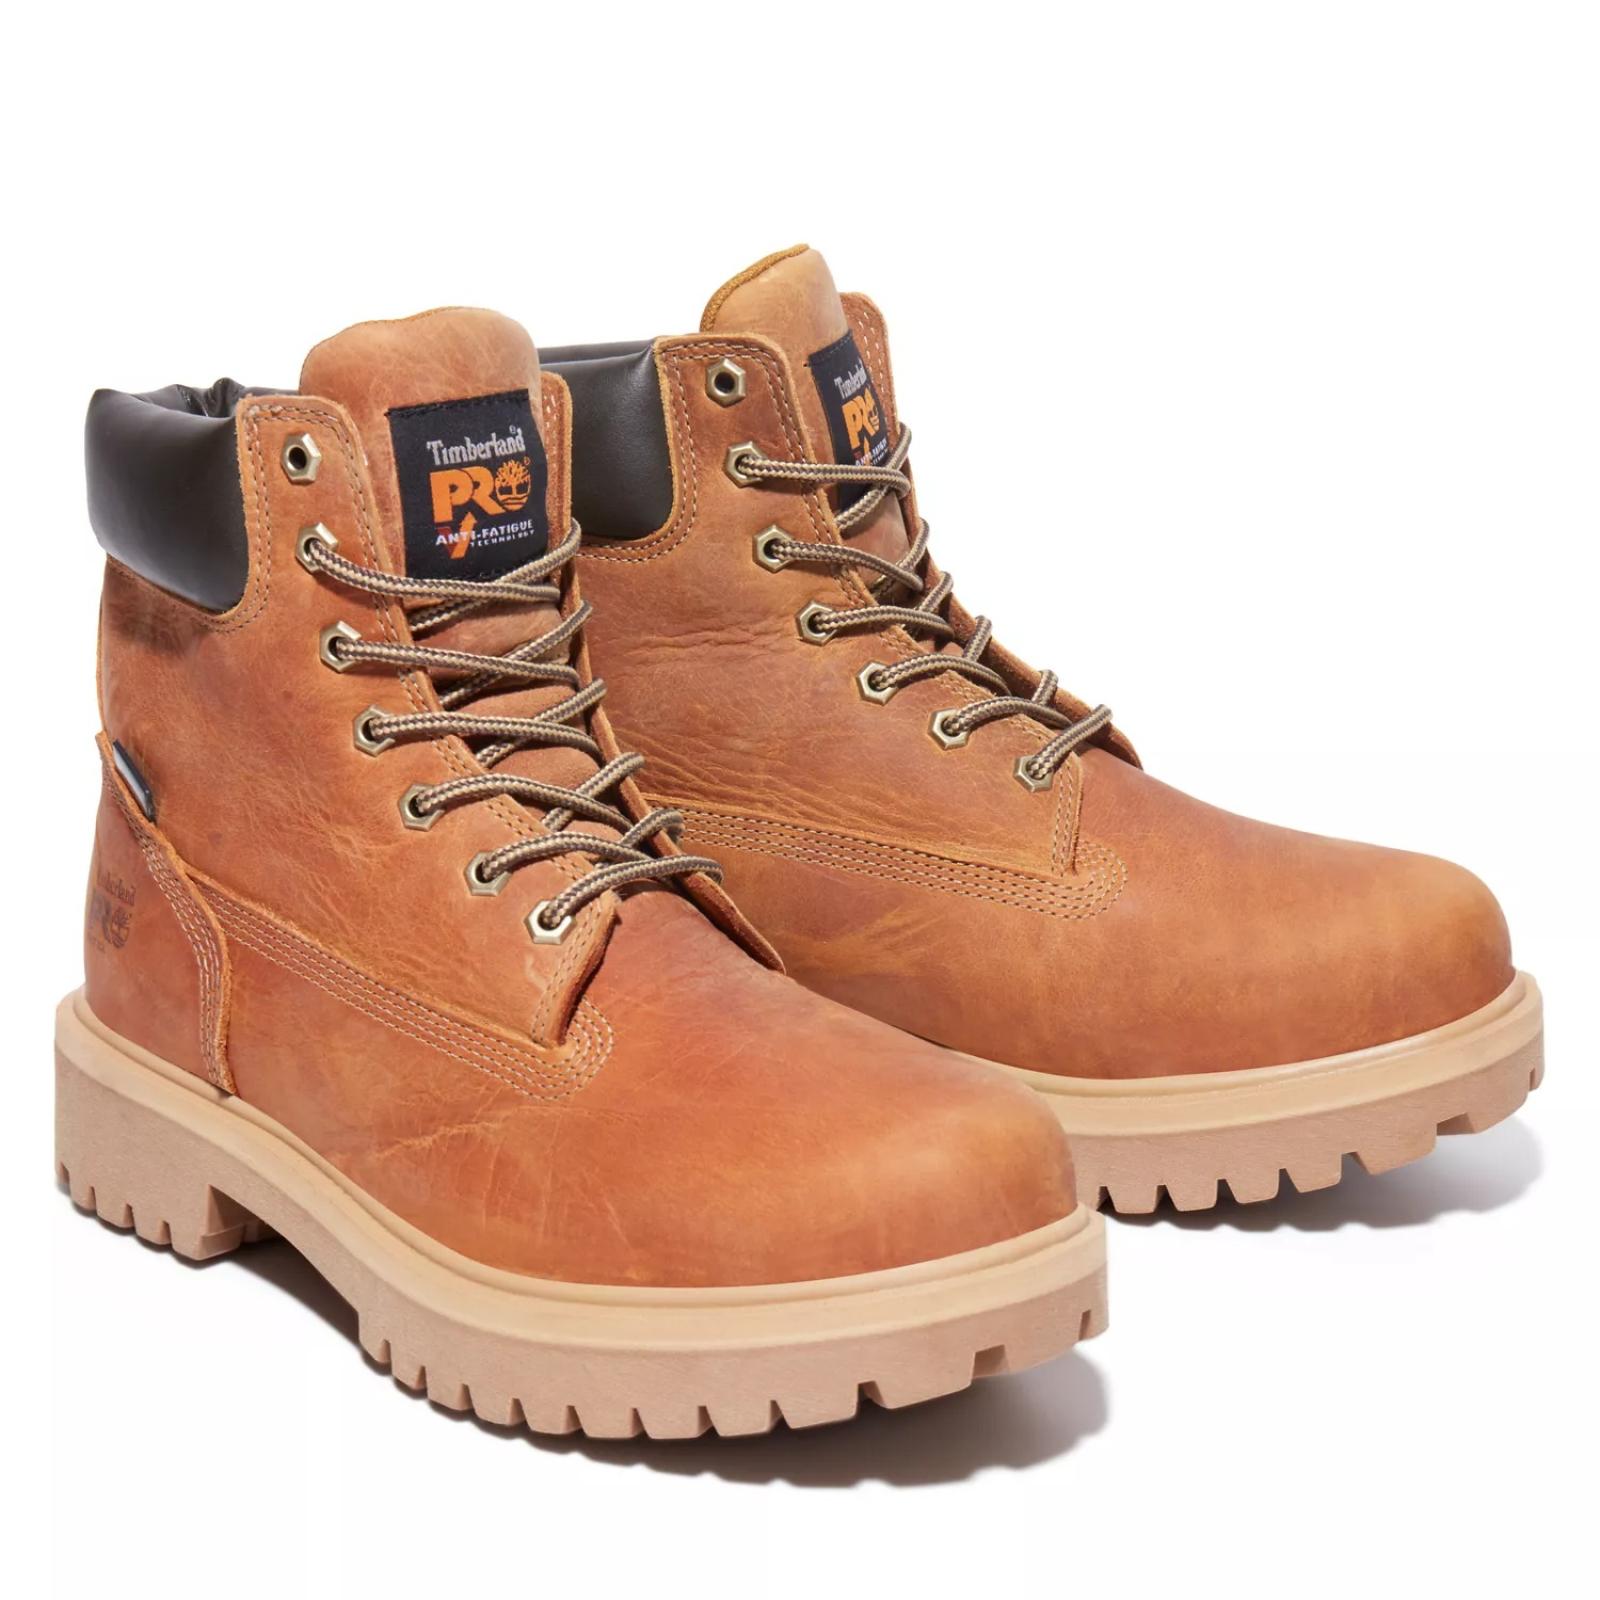 Timberland PRO Men's Direct Attach 6" Soft Toe Boots